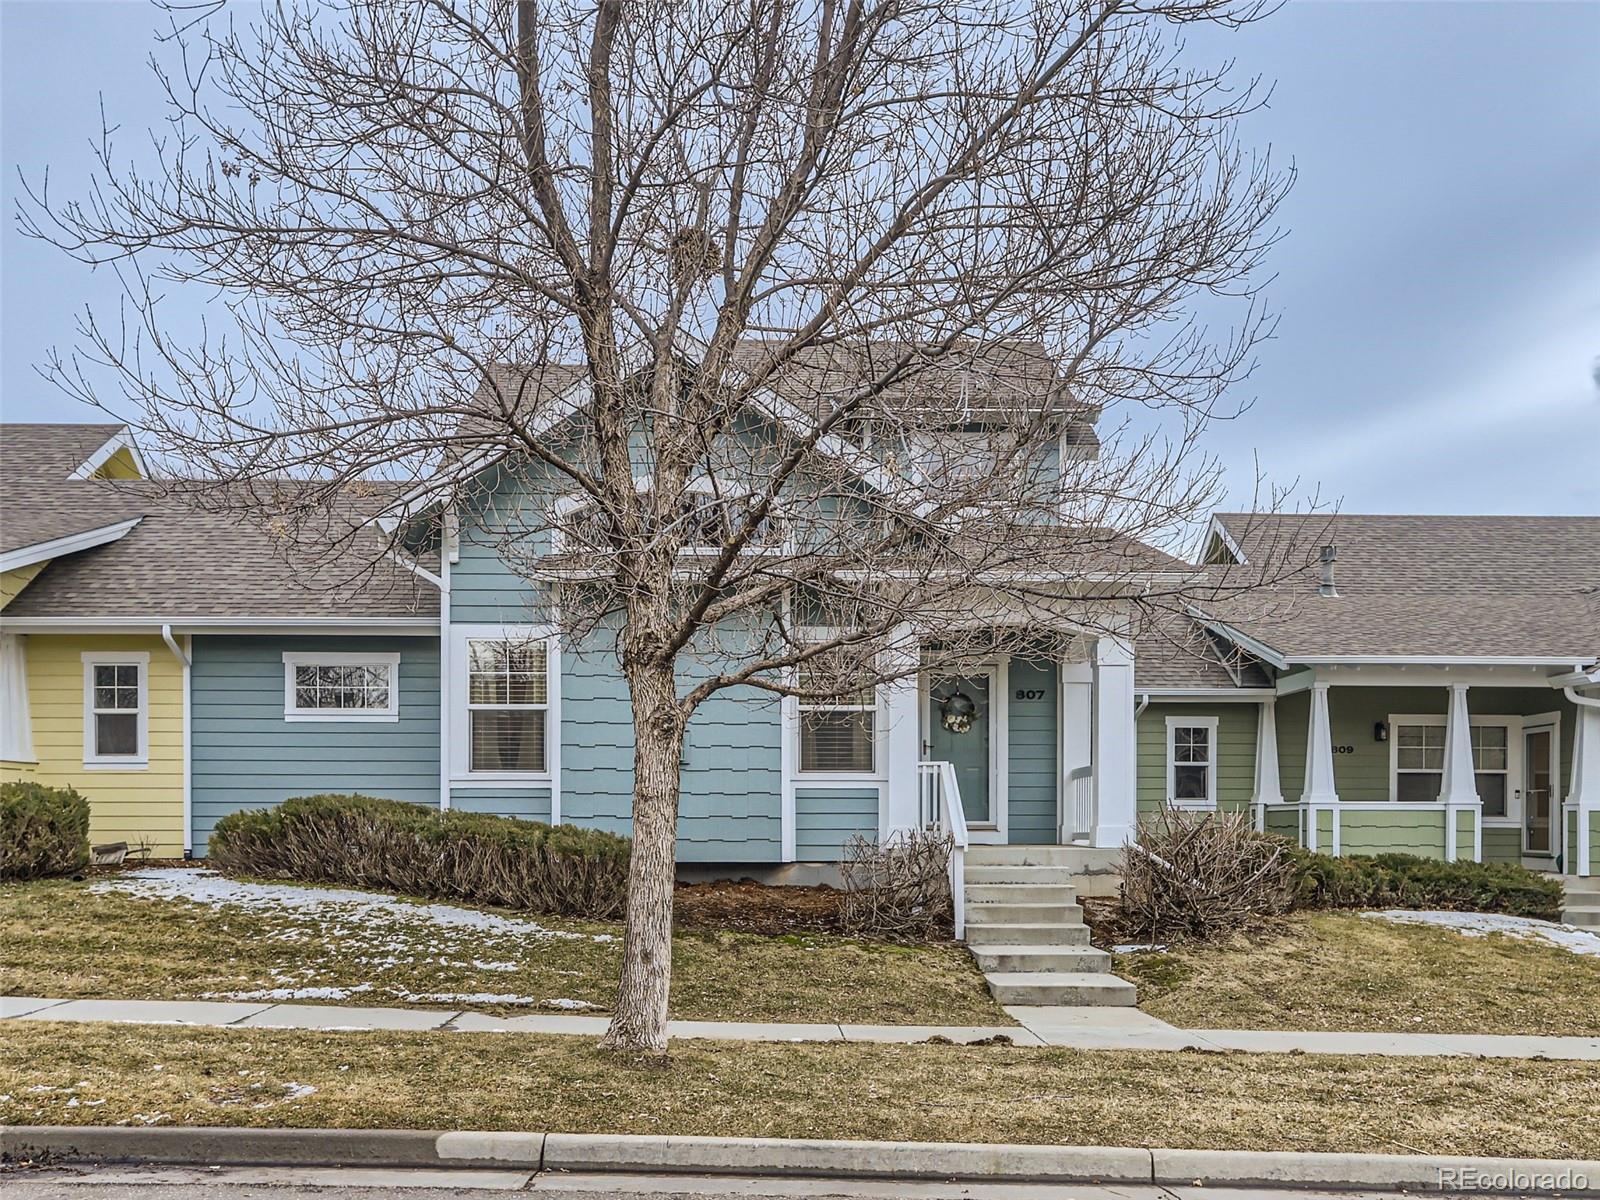 Report Image for 807  Welch Avenue,Berthoud, Colorado